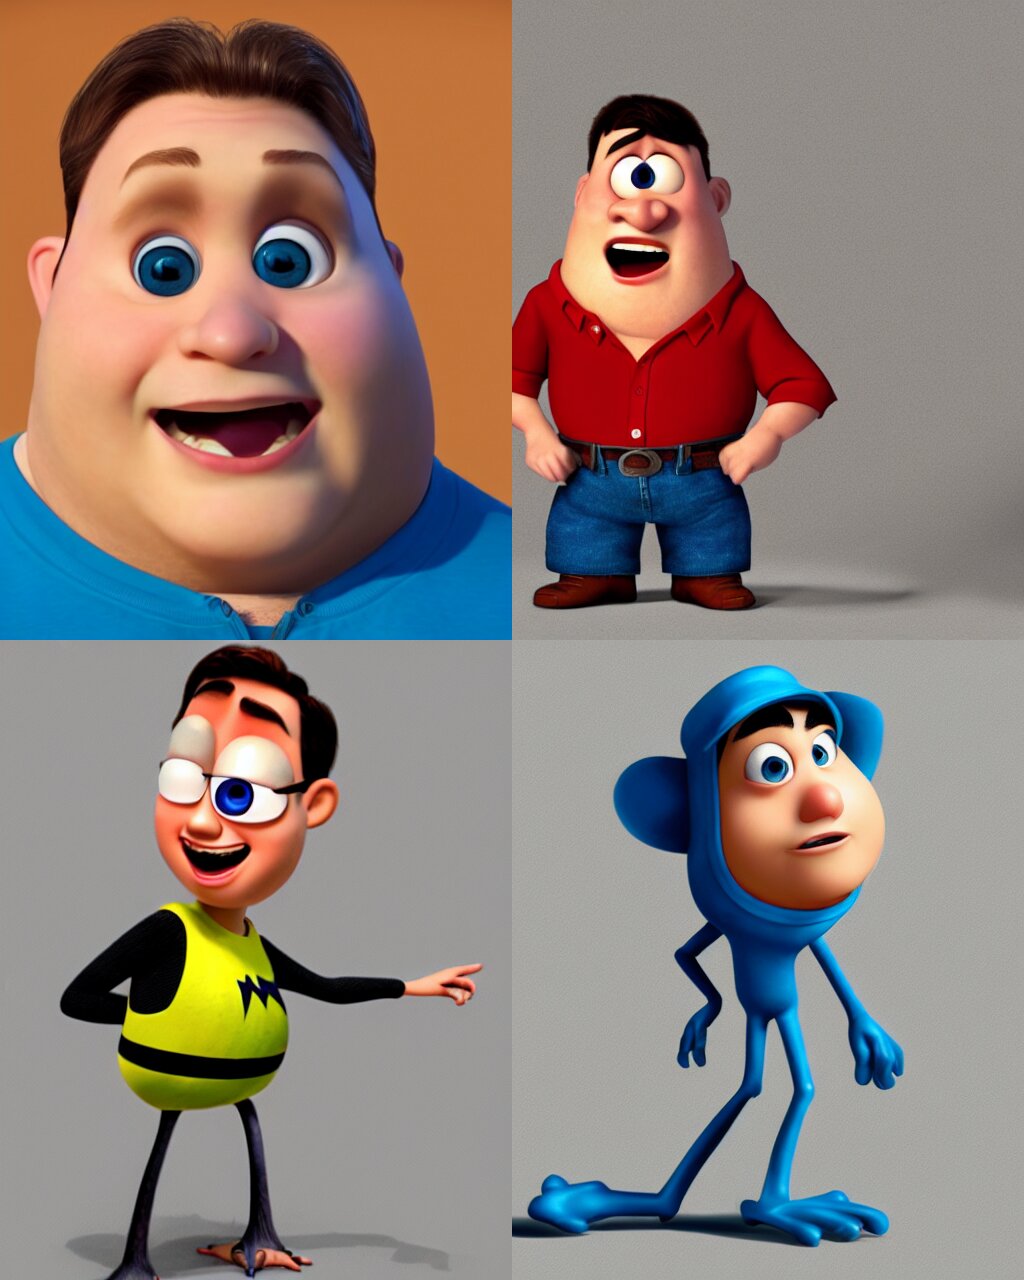 Medium shot of a typical character in the style of Pixar